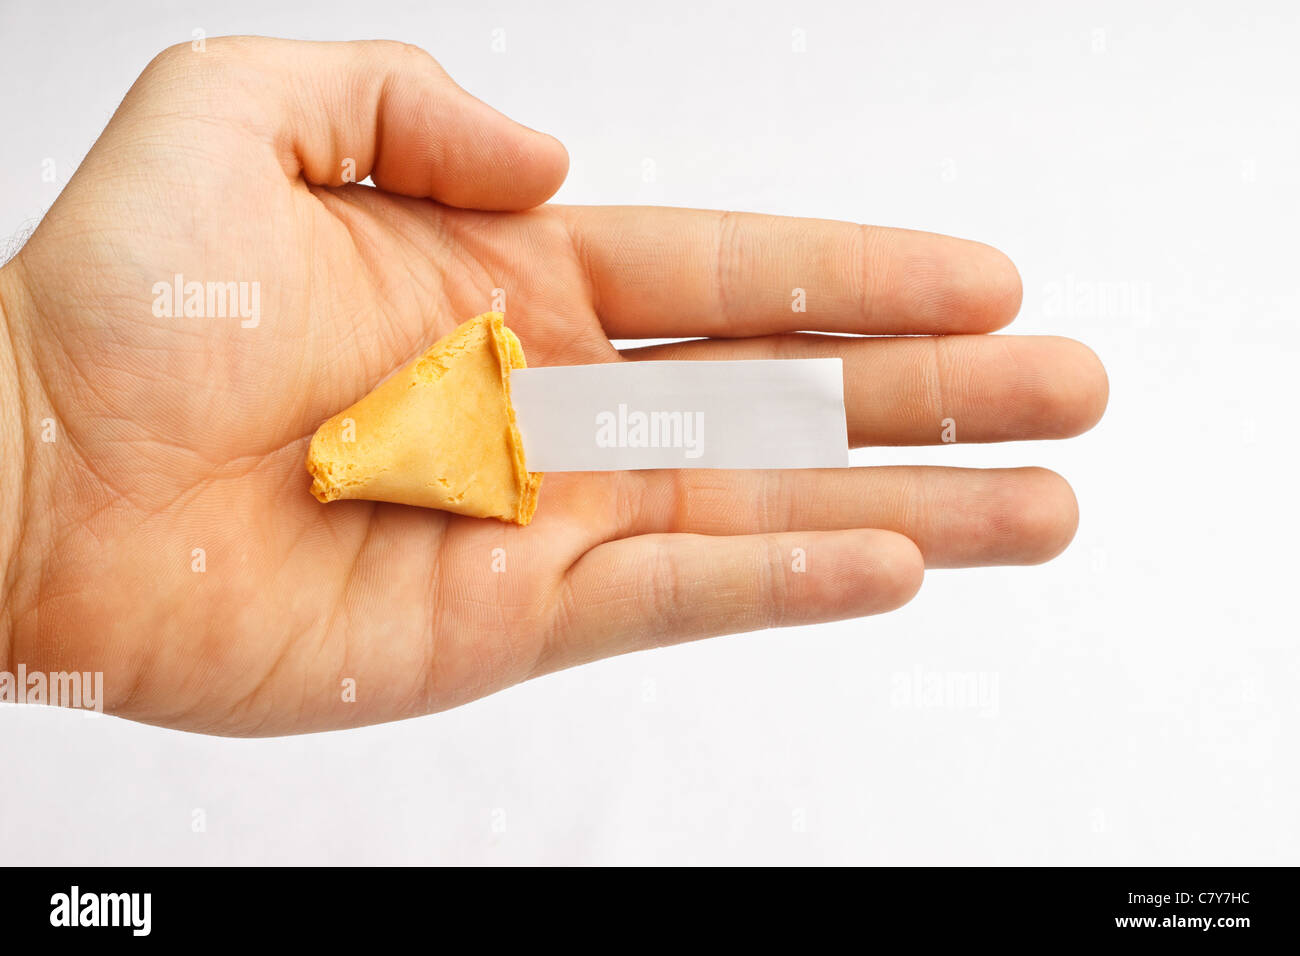 Half of a fortune cookie in a hand with a blank fortune Stock Photo